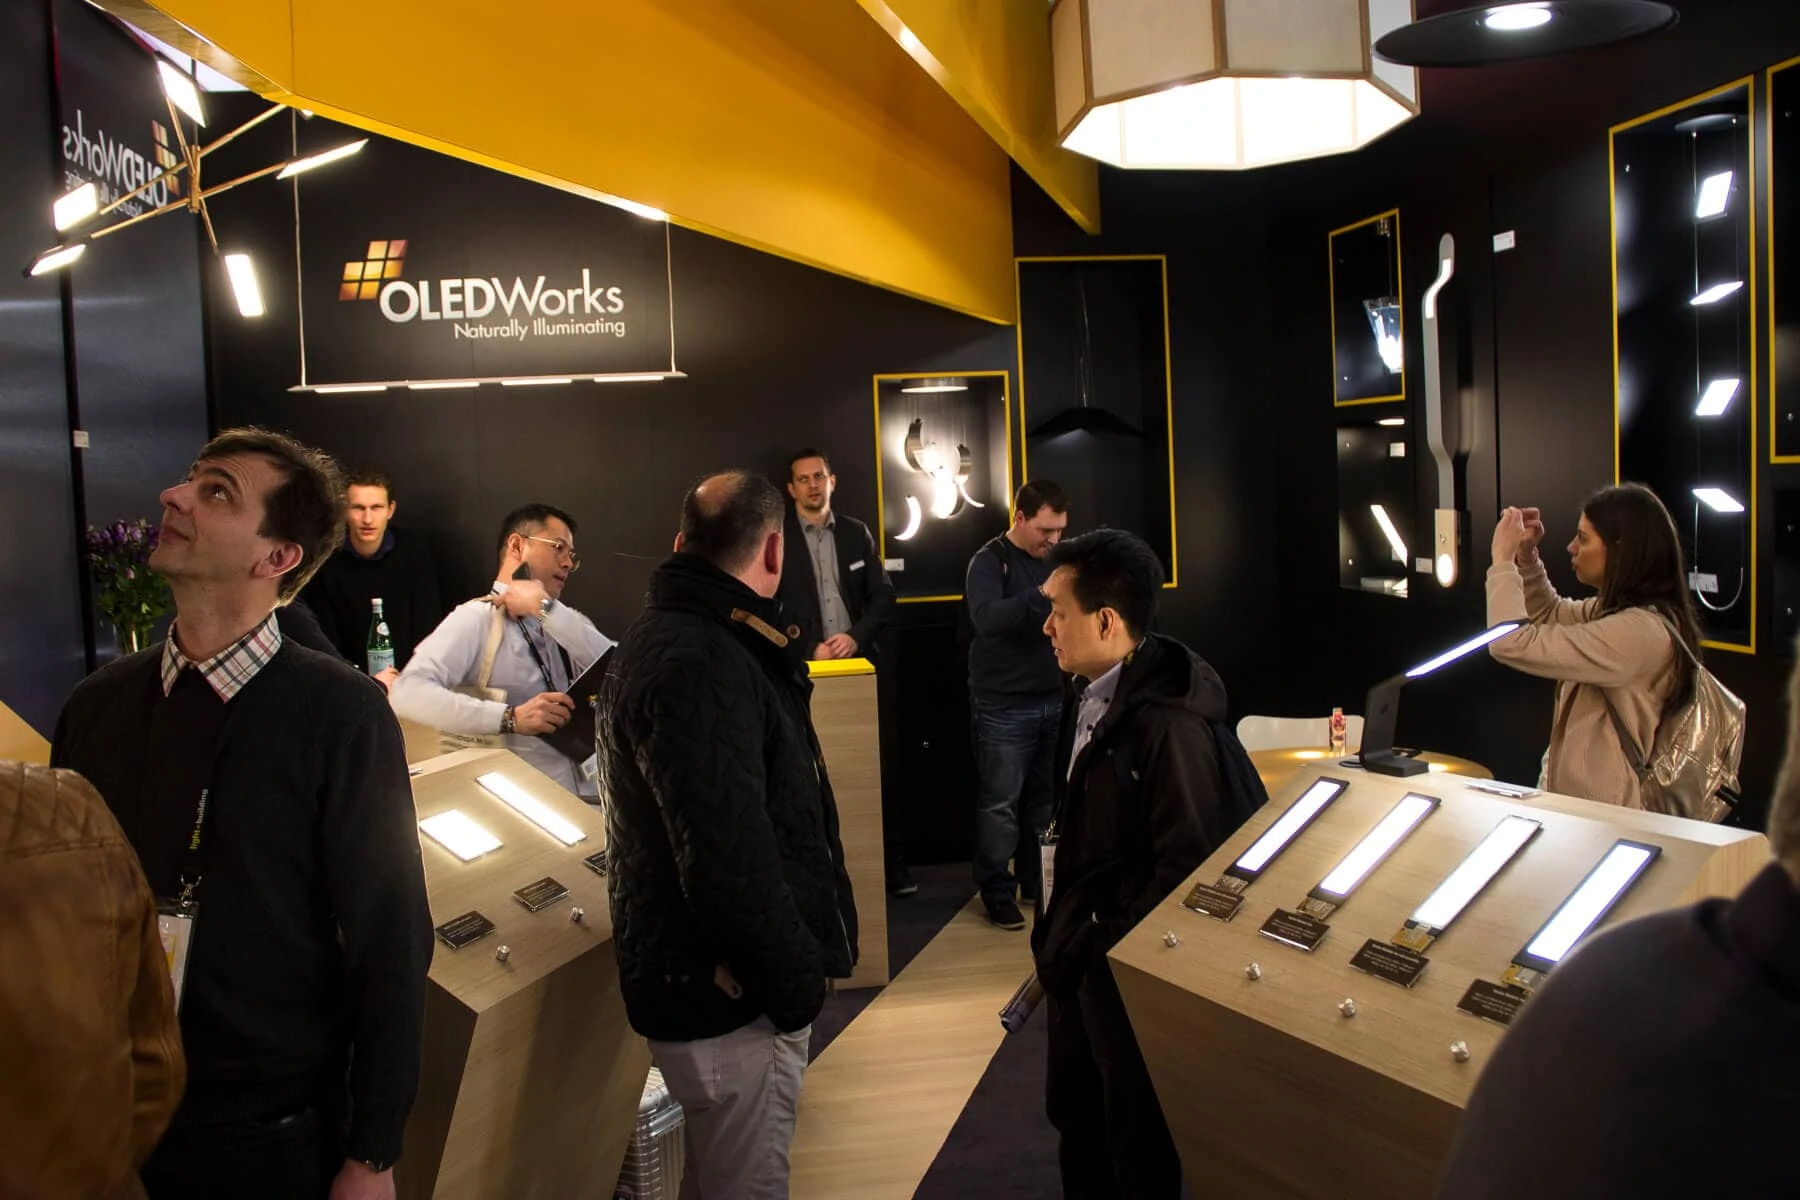 crowded OLEDWorks booth at Light + Building 2018